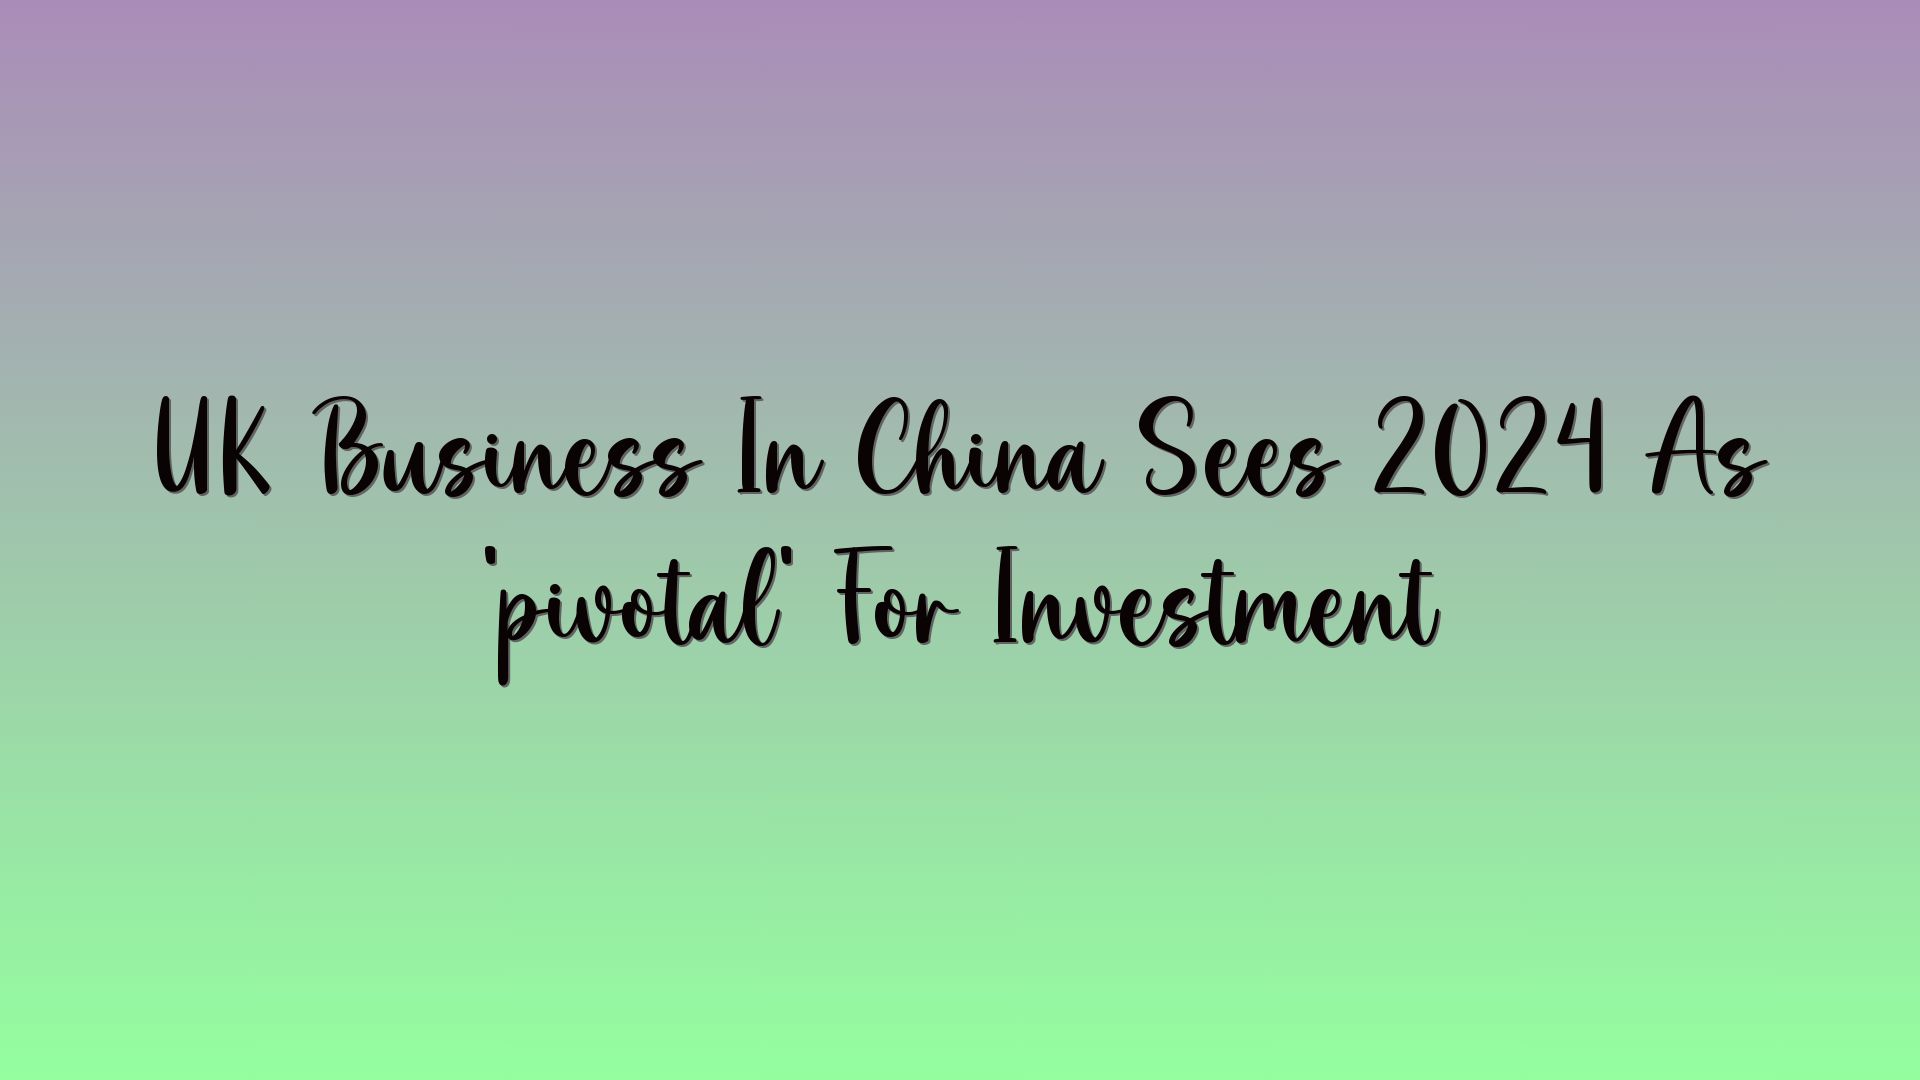 UK Business In China Sees 2024 As ‘pivotal’ For Investment